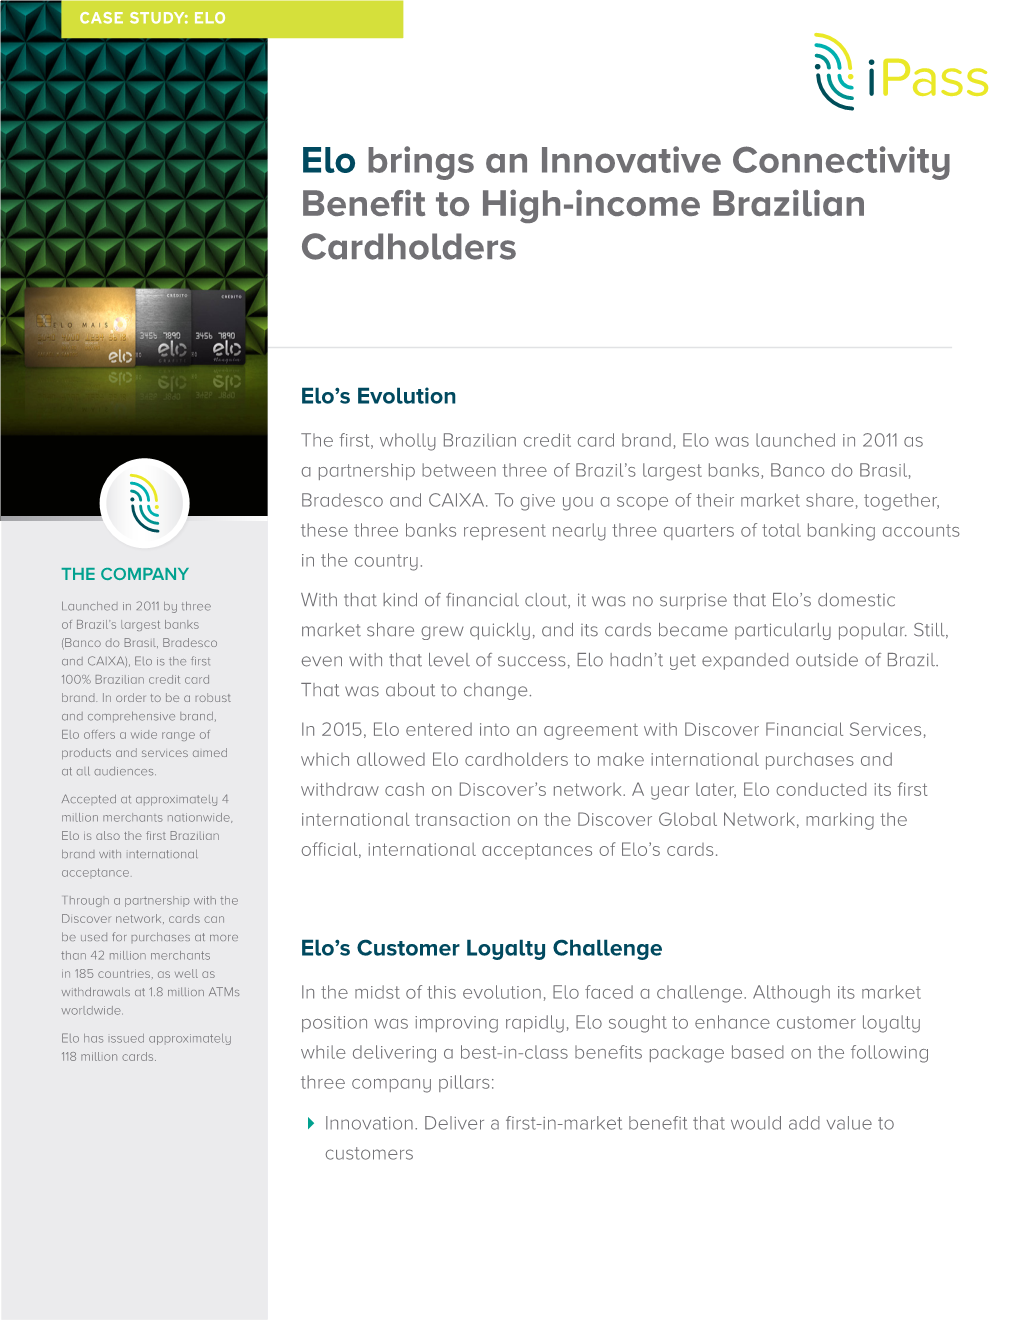 Elo Brings an Innovative Connectivity Benefit to High-Income Brazilian Cardholders